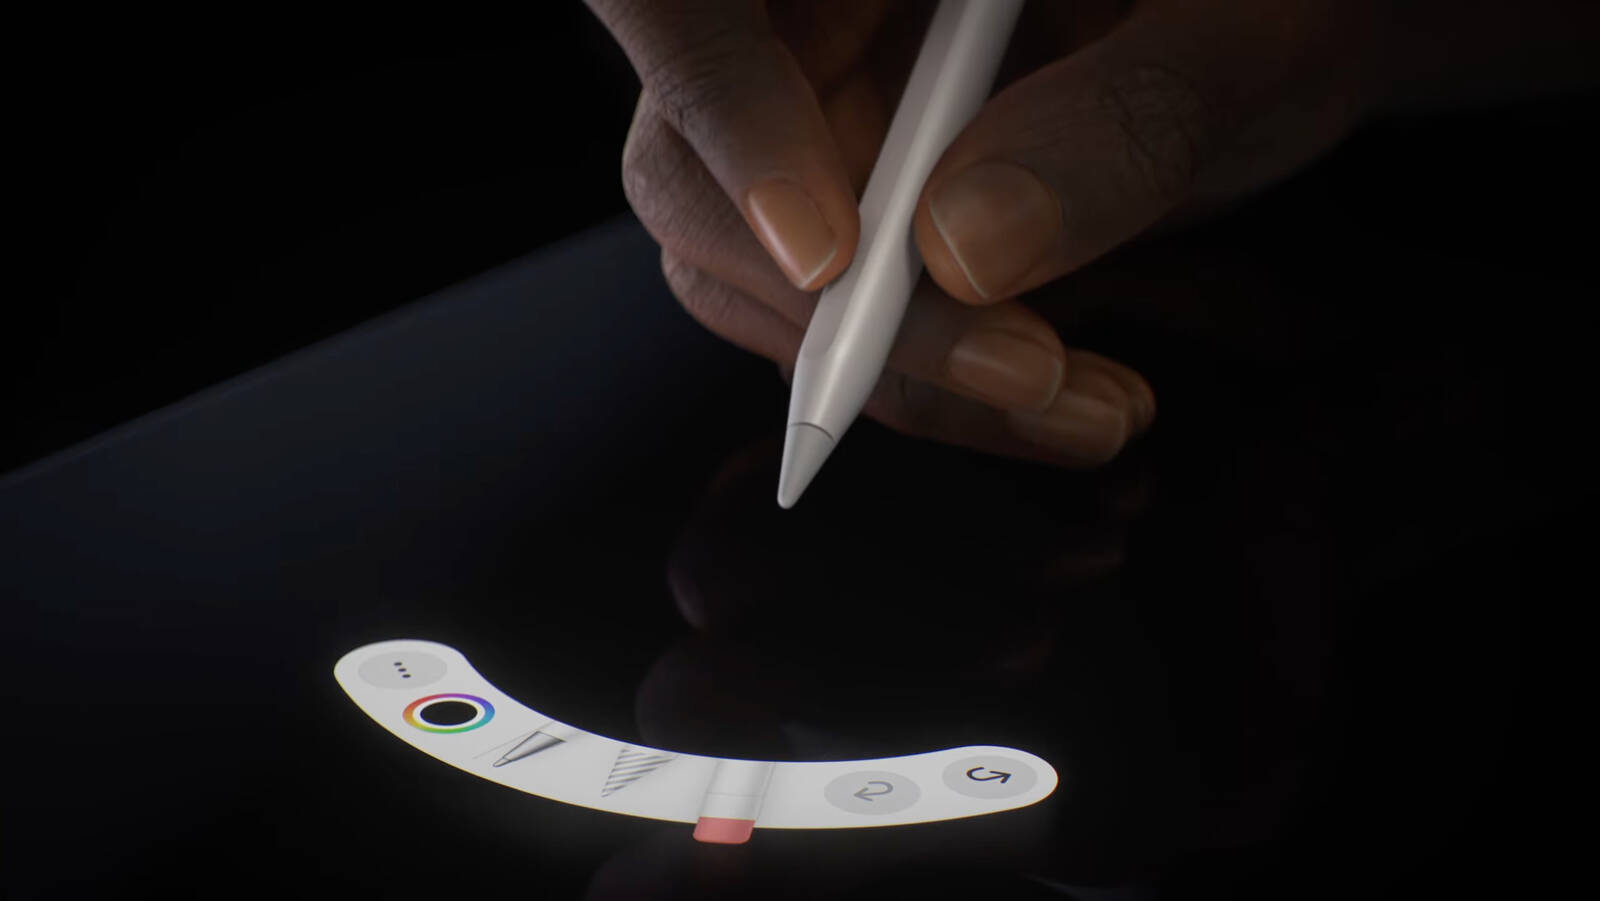 Apple Pencil Pro Announced With New Squeeze Gesture, Haptic Feedback, Find My, and More